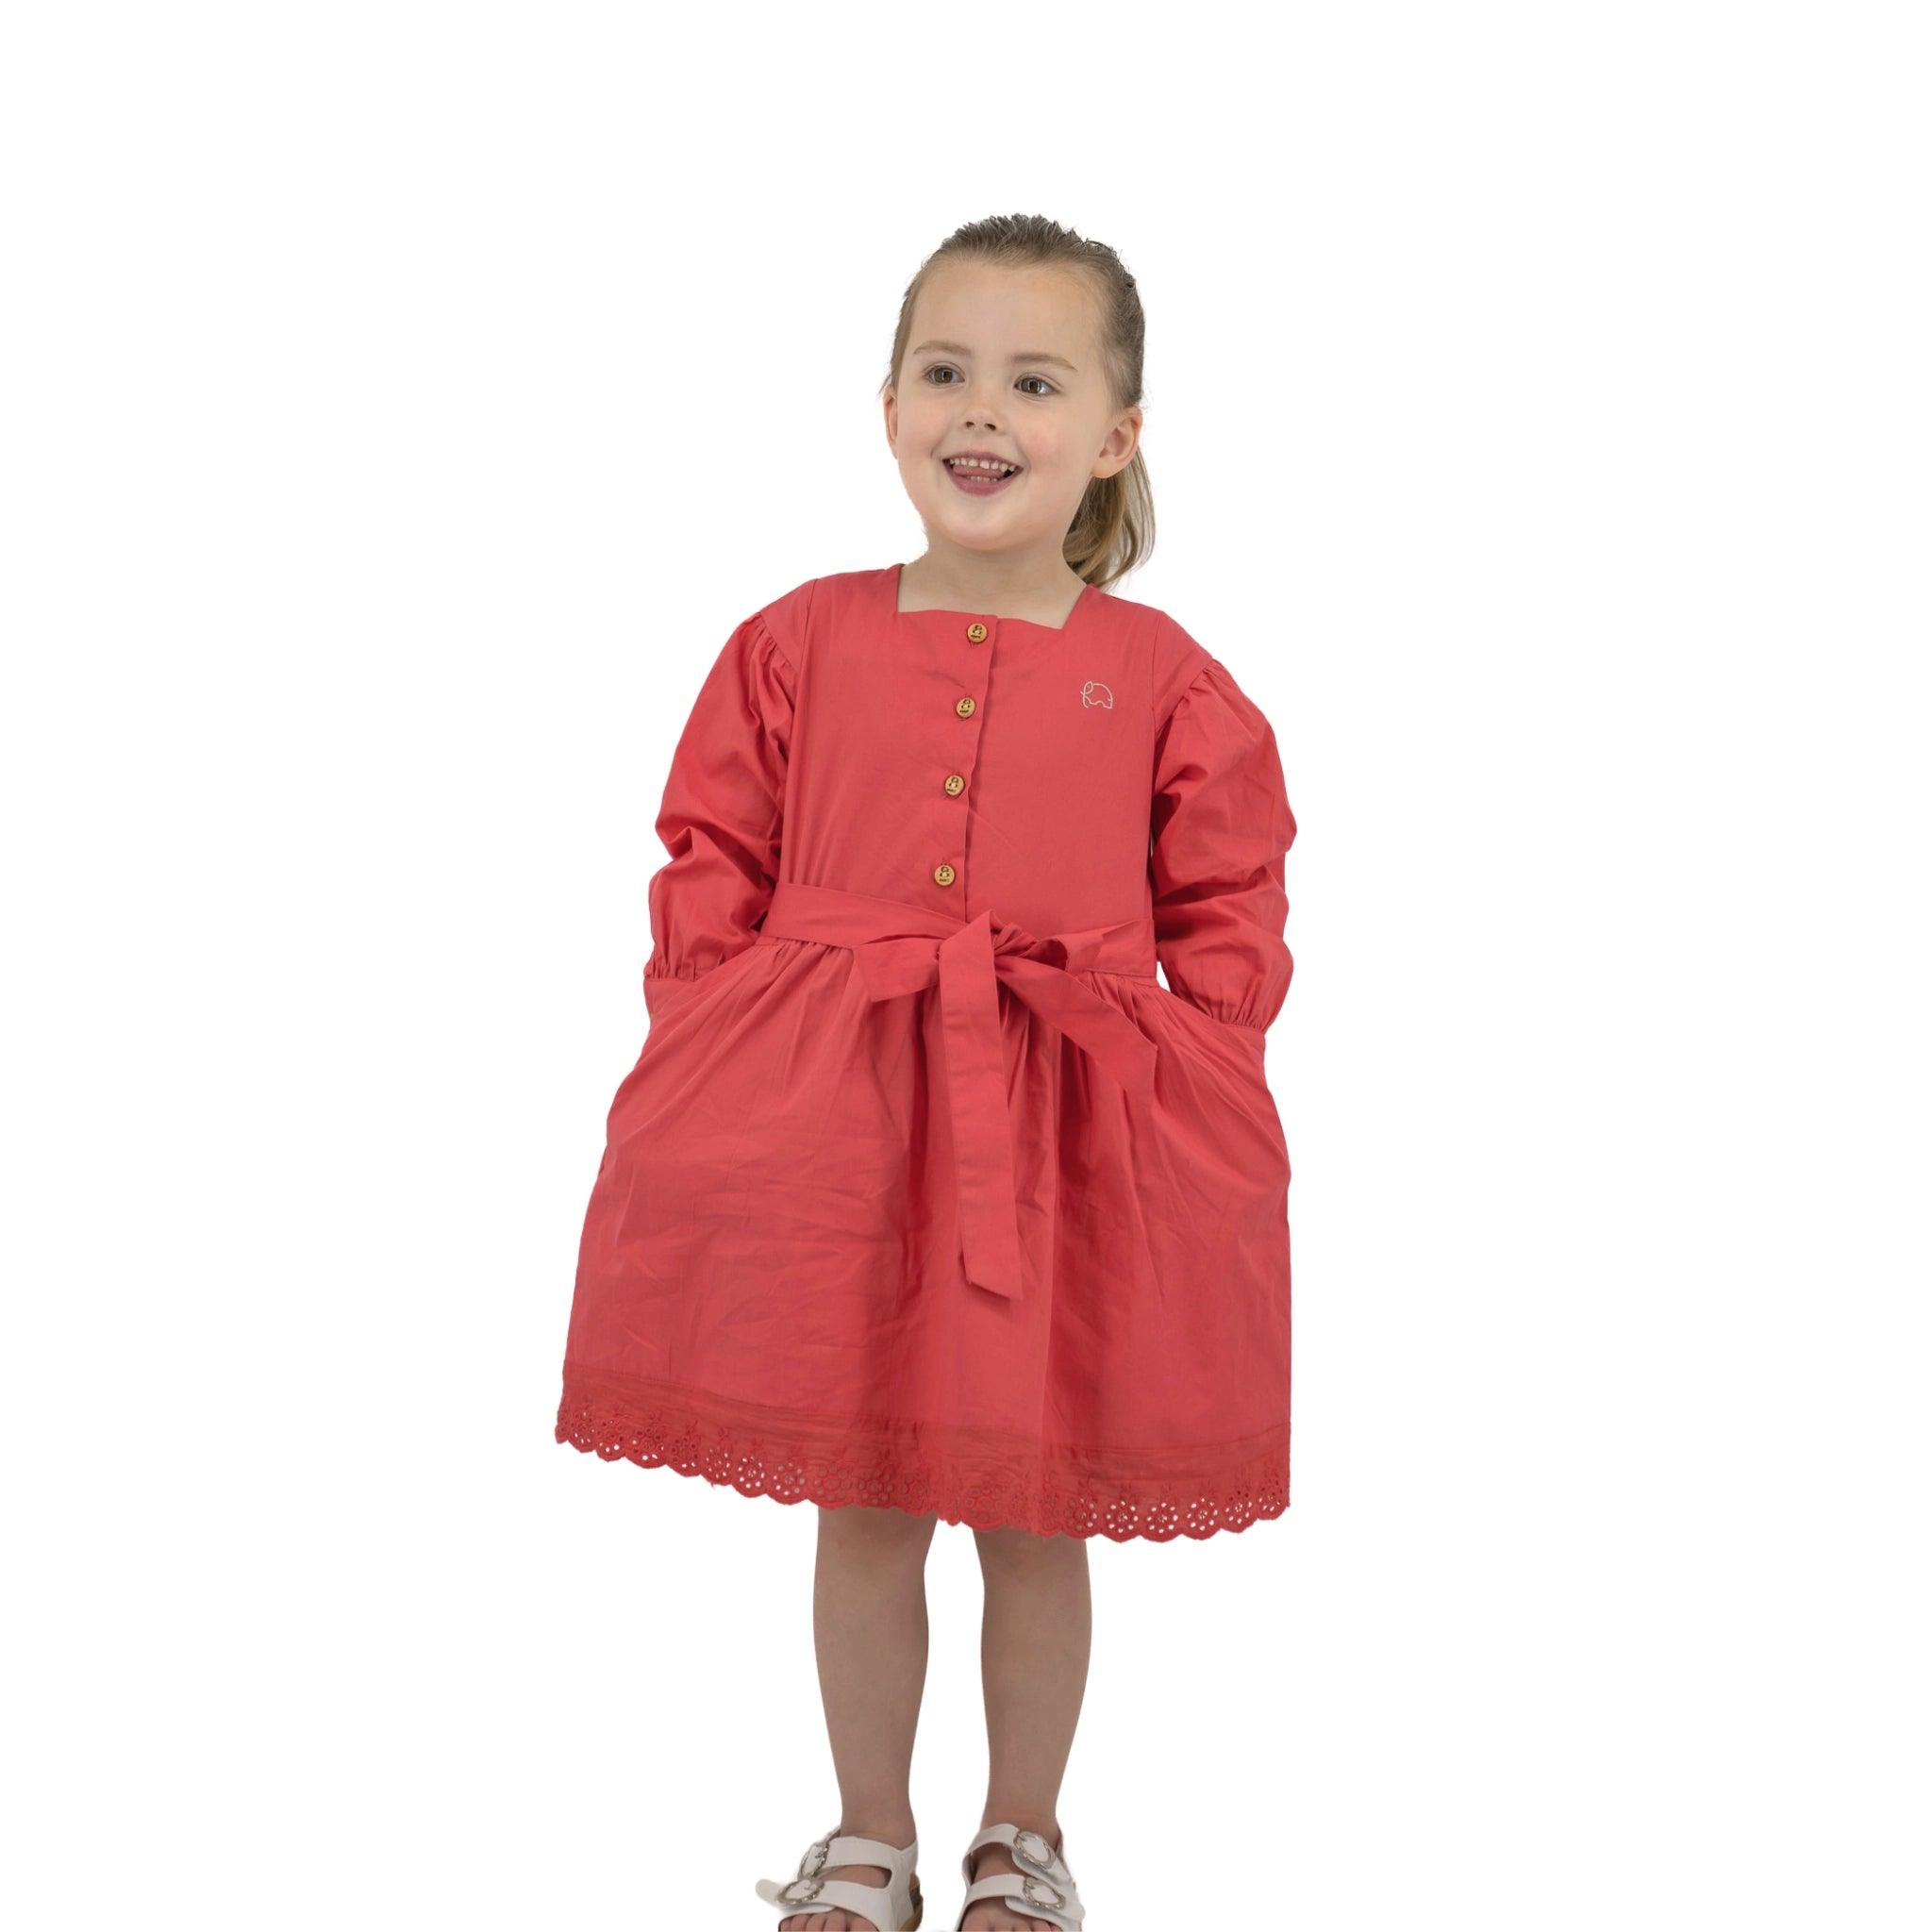 Young girl smiling in a Karee red long puff sleeve cotton dress with buttons and a bow, standing against a white background.